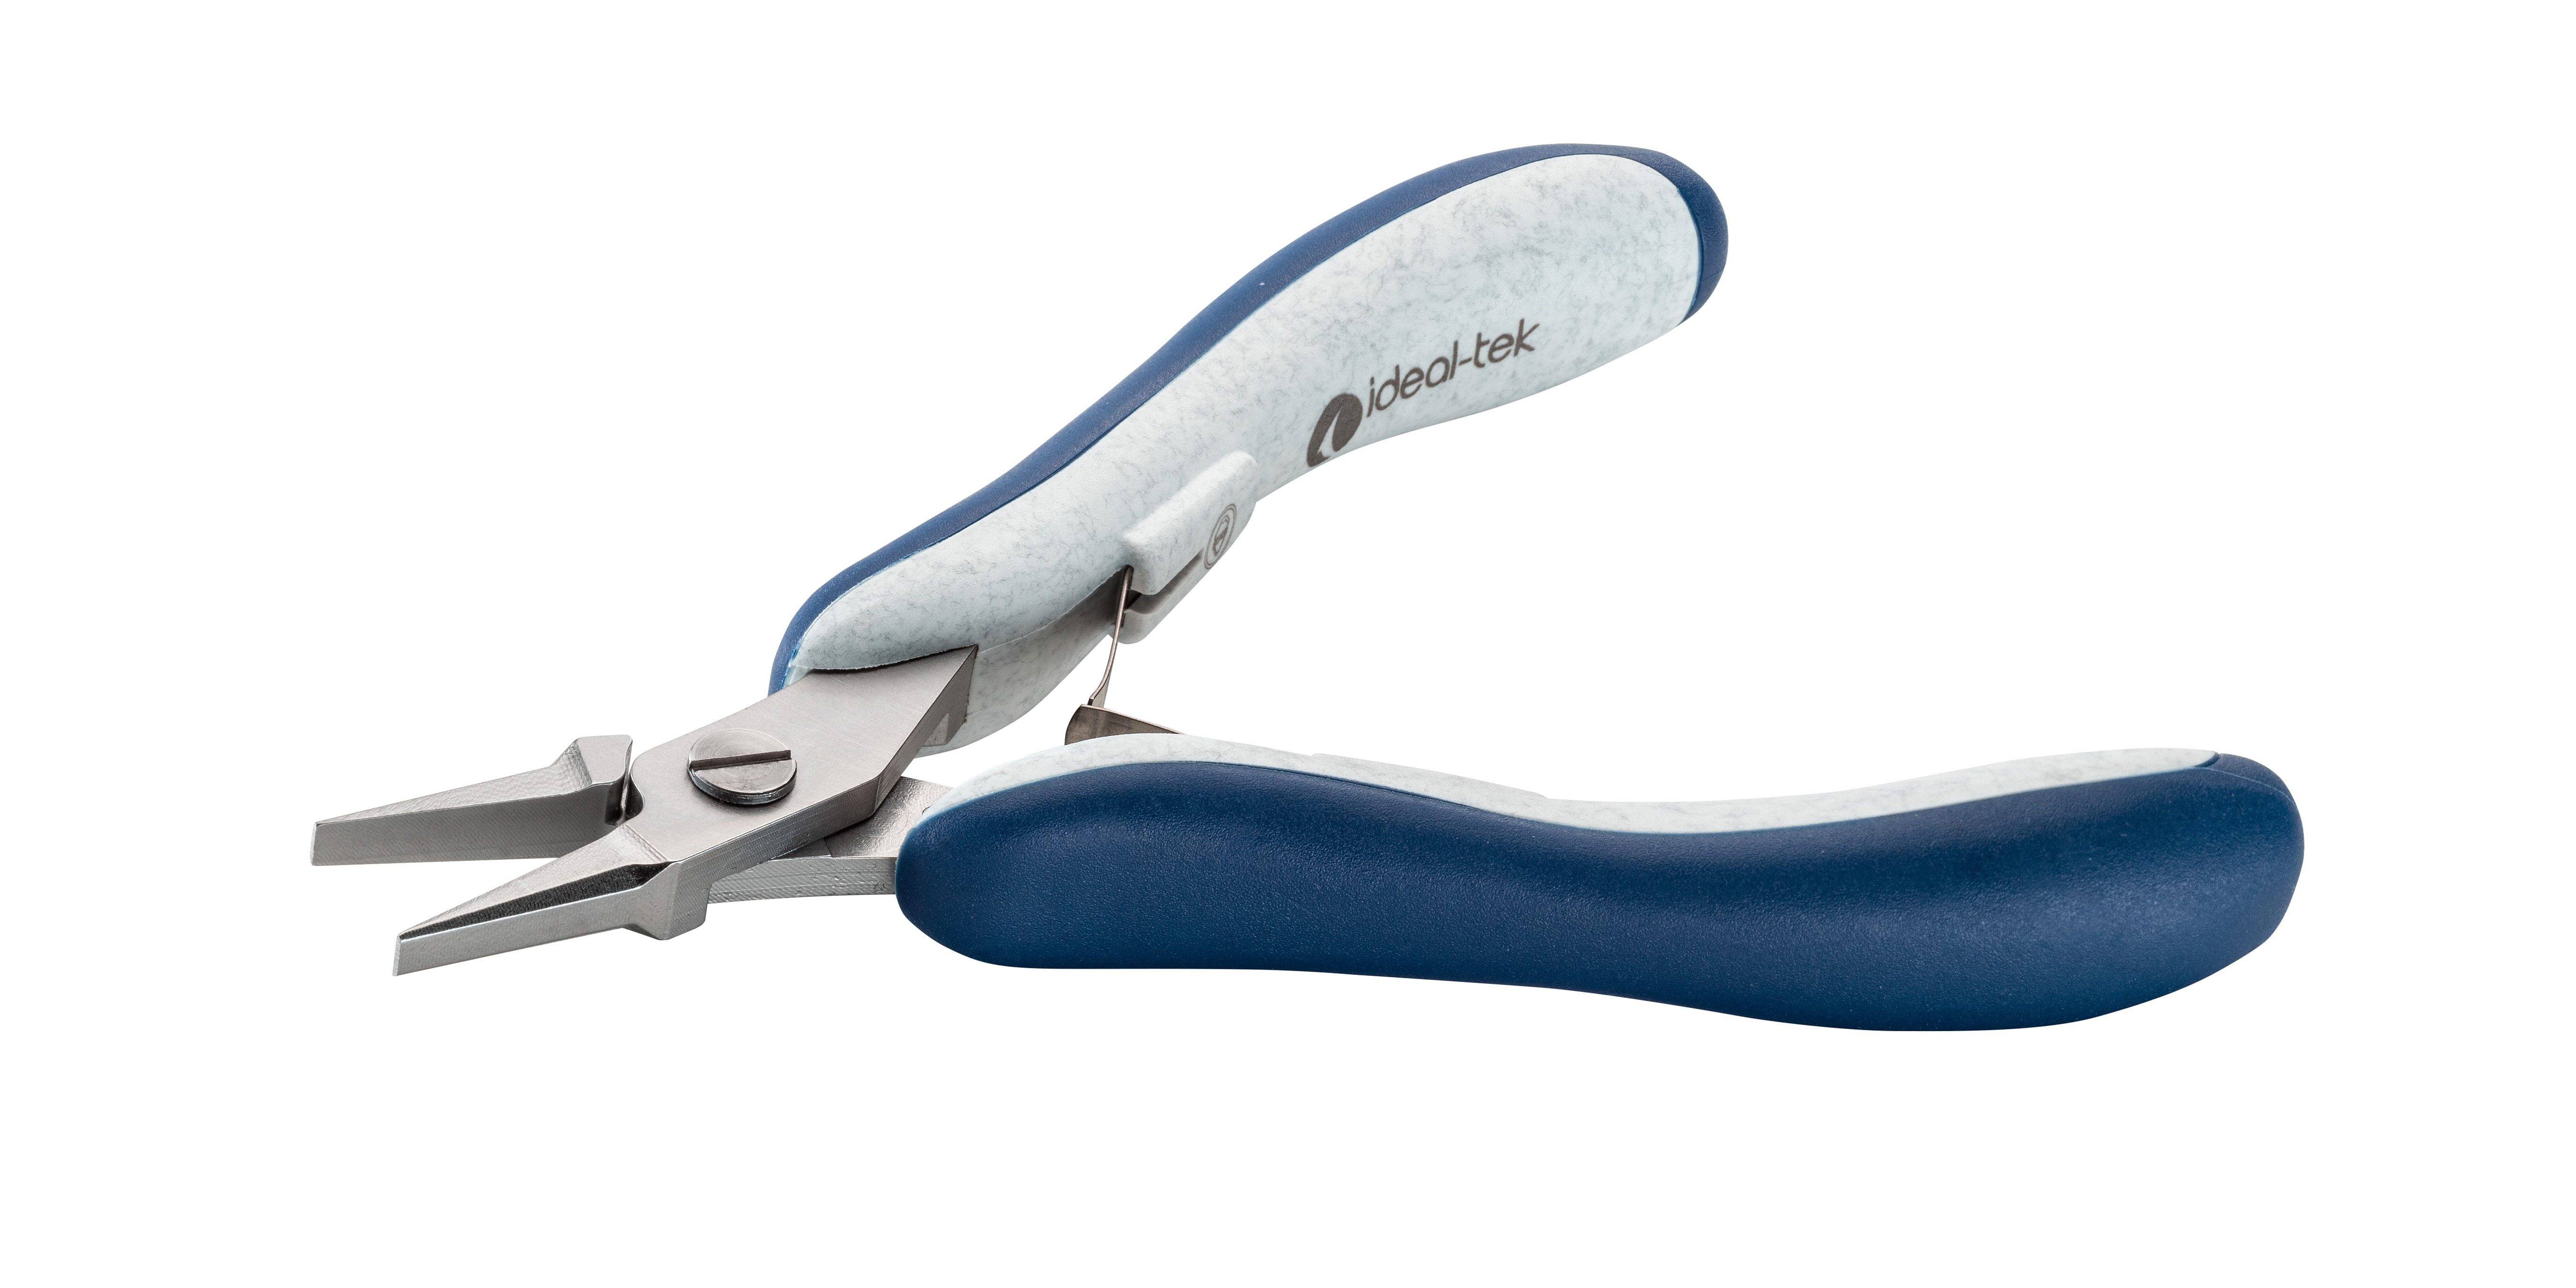 High Precision Pliers - Cutters and Pliers In WATCHMAKING & JEWELRY